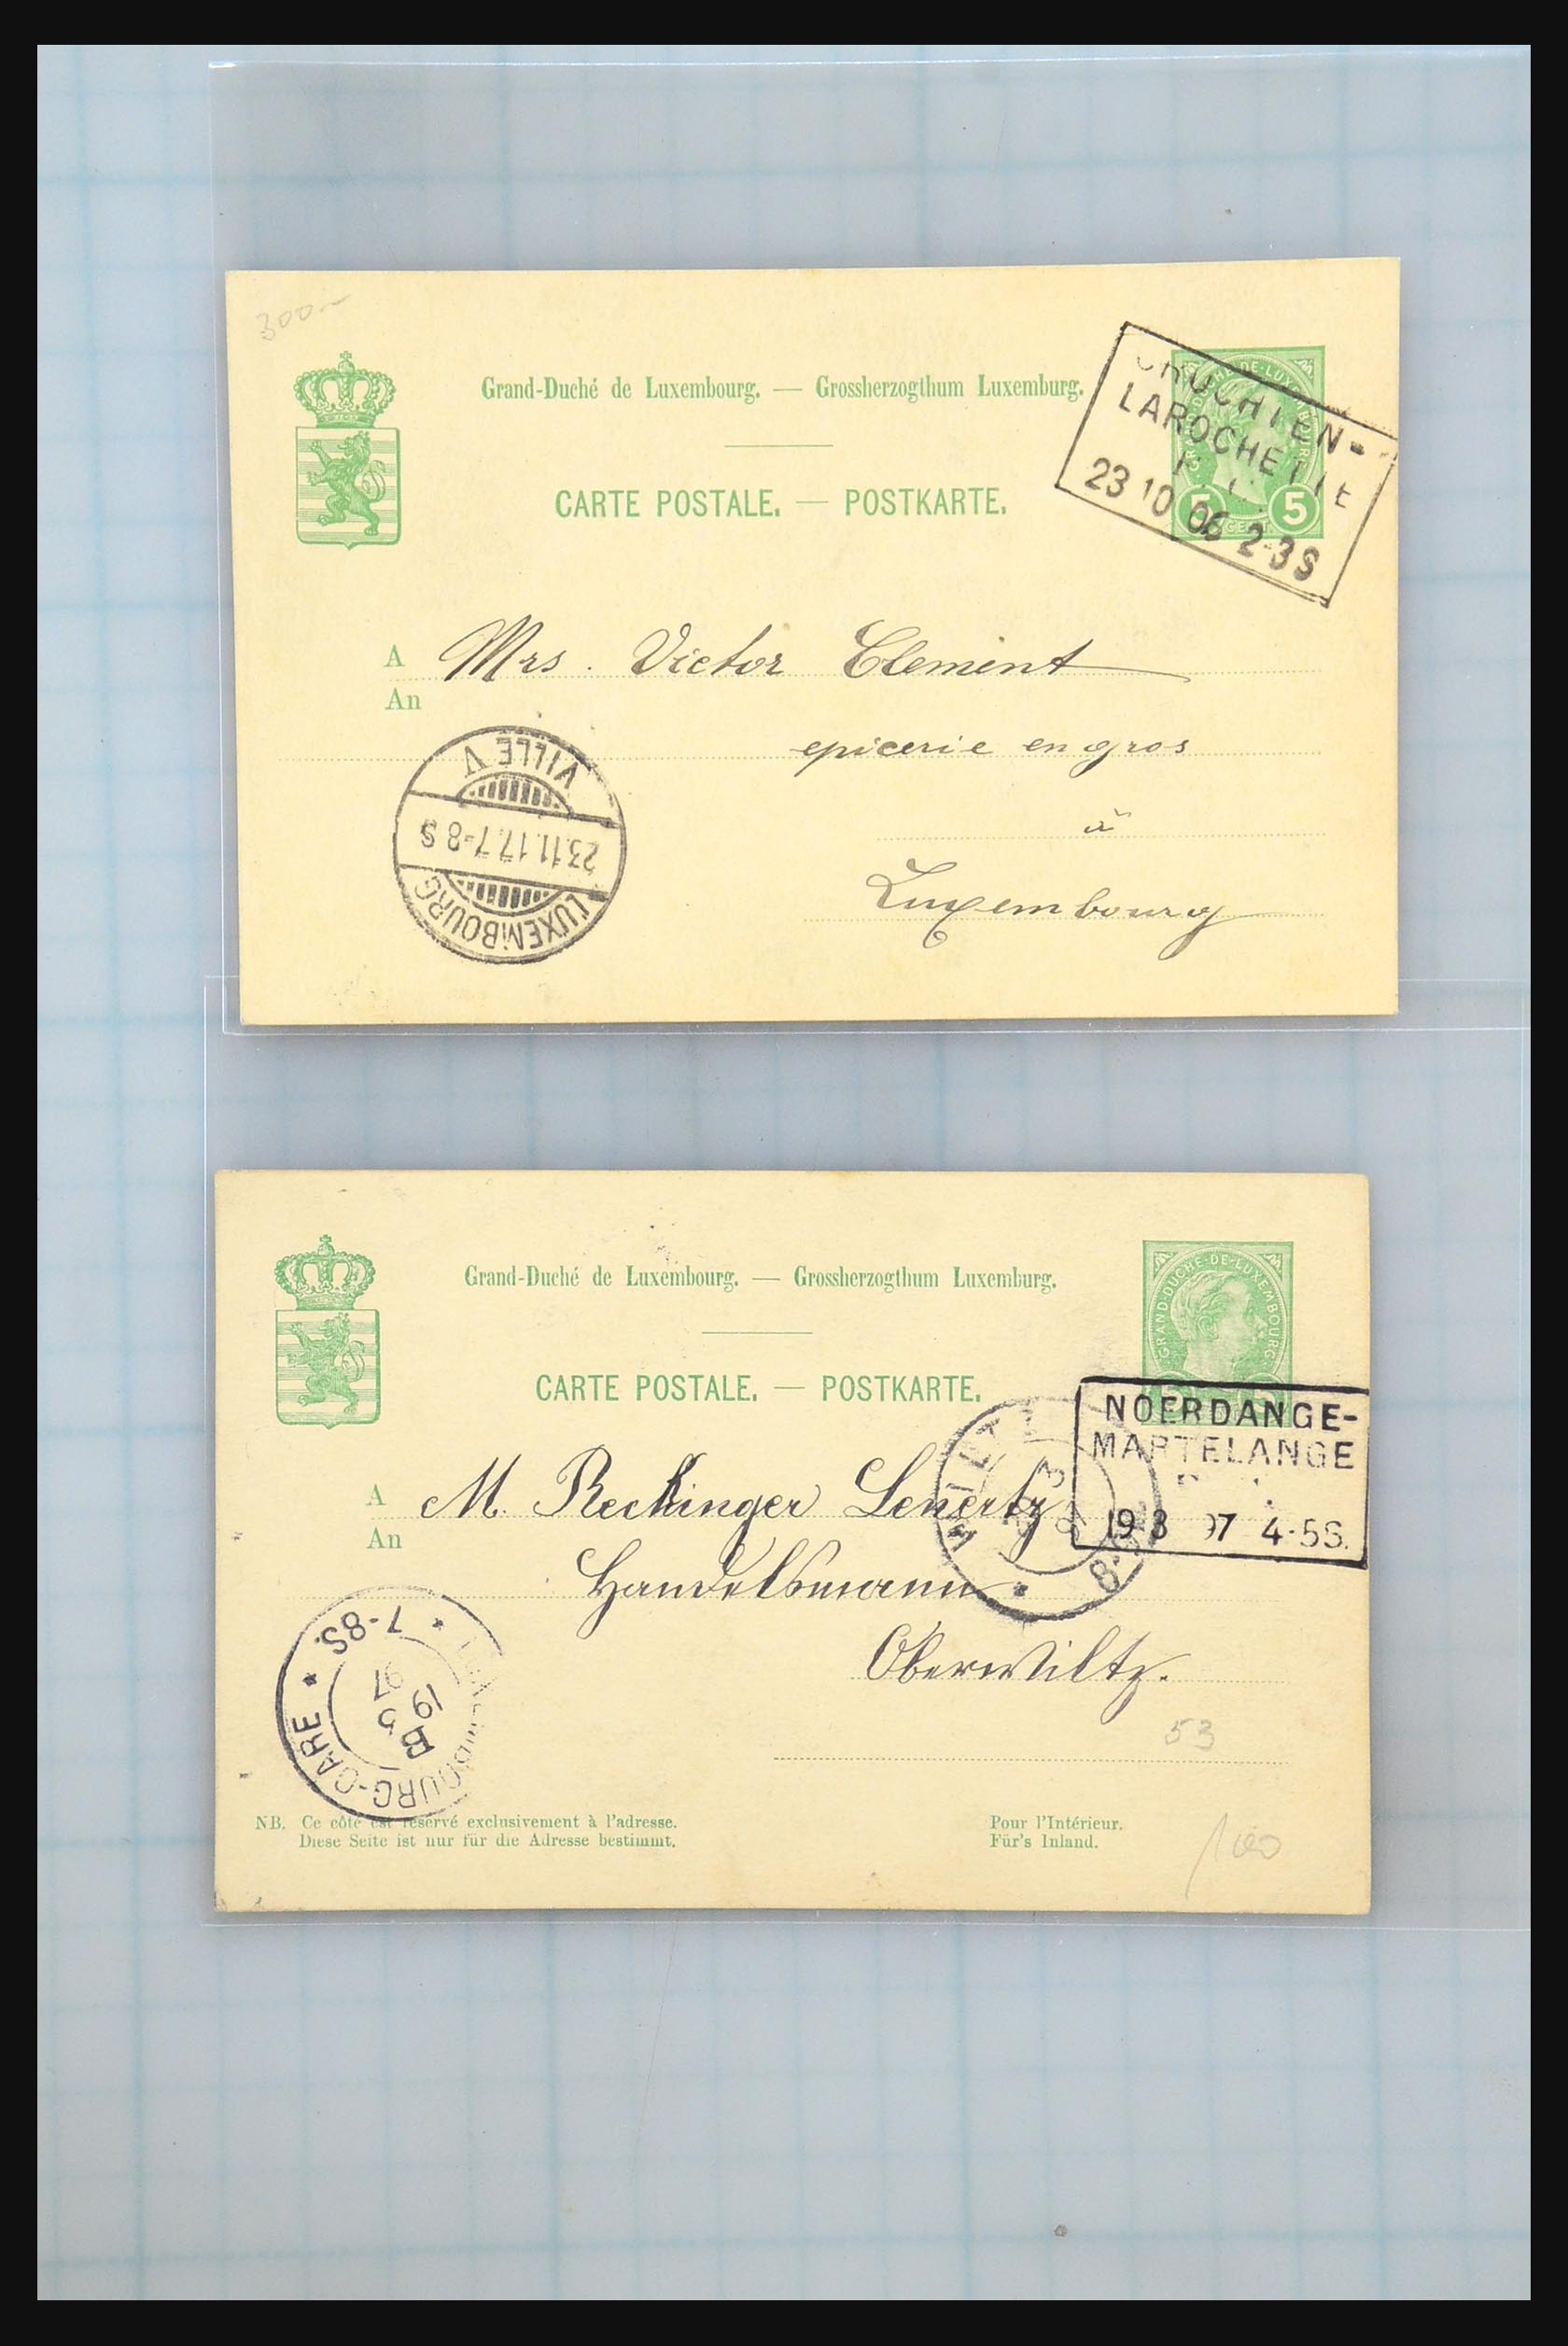 31358 055 - 31358 Portugal/Luxemburg/Greece covers 1880-1960.